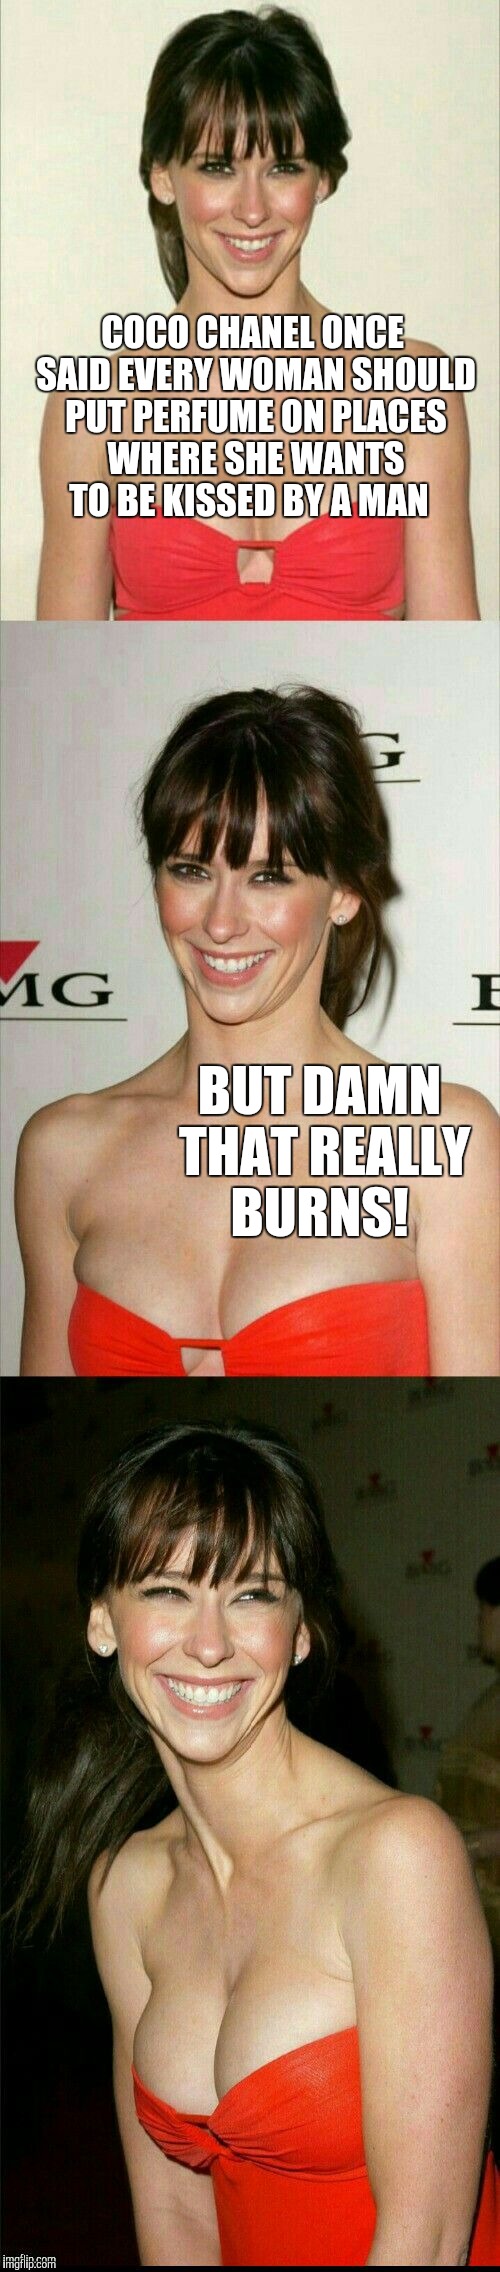 Jennifer Love Hewitt joke template  | COCO CHANEL ONCE SAID EVERY WOMAN SHOULD PUT PERFUME ON PLACES WHERE SHE WANTS TO BE KISSED BY A MAN; BUT DAMN THAT REALLY BURNS! | image tagged in jennifer love hewitt joke template,jbmemegeek,bad jokes,jennifer love hewitt | made w/ Imgflip meme maker